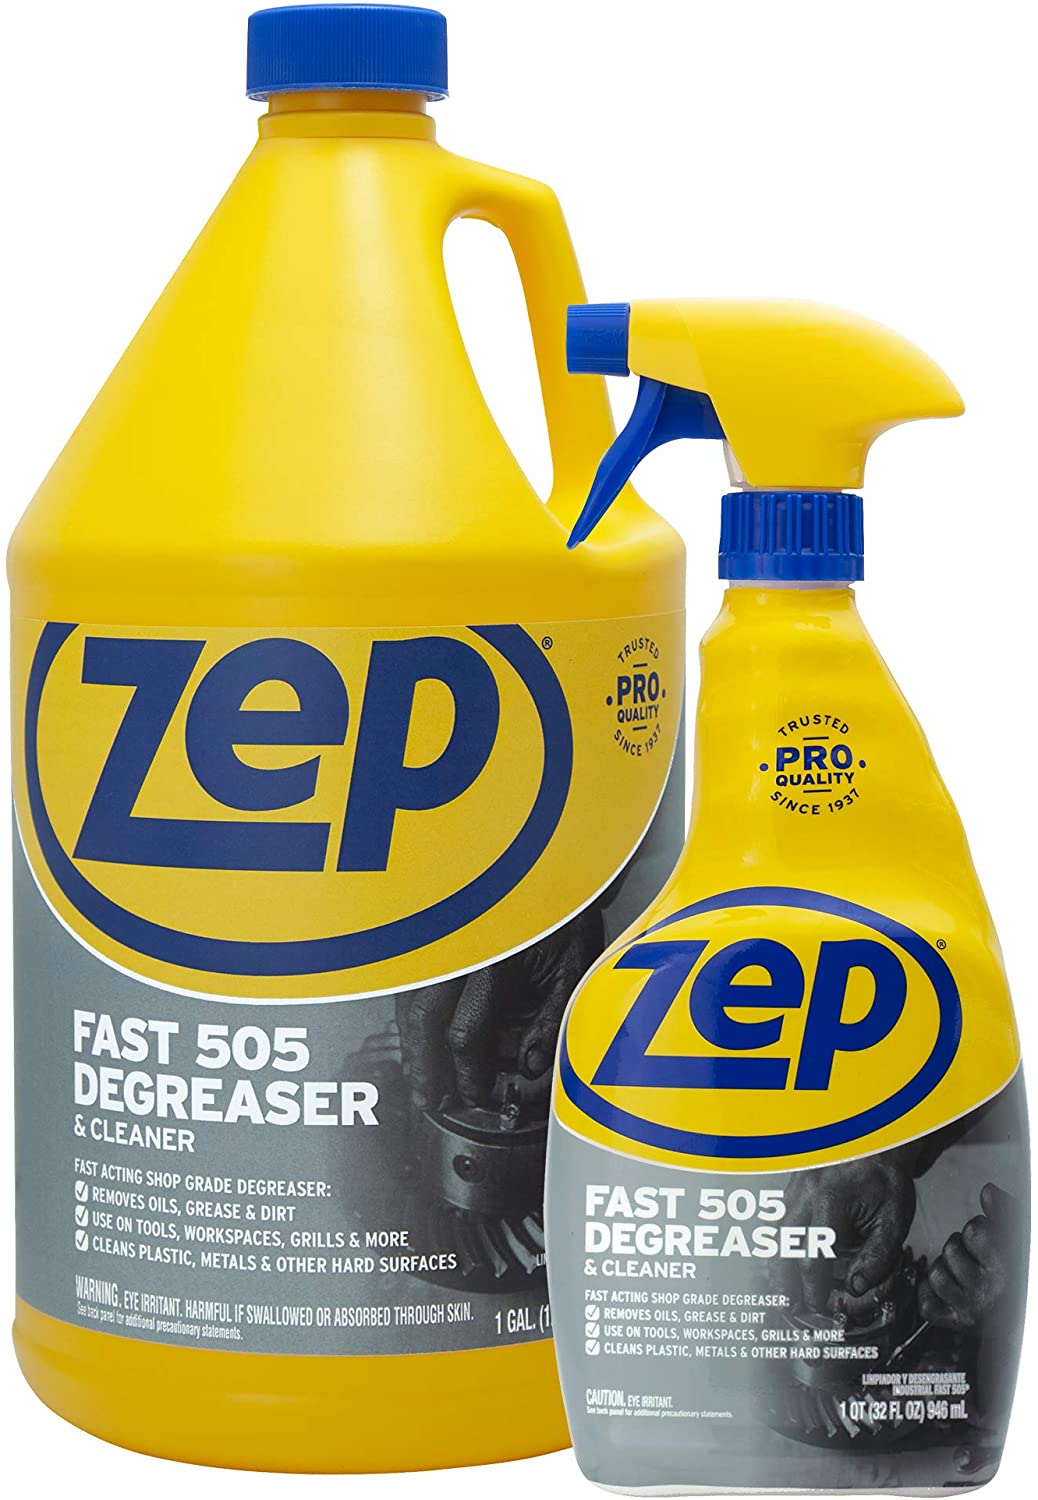 Zep Driveway and Concrete 128 Fluid Ounces Degreaser in the